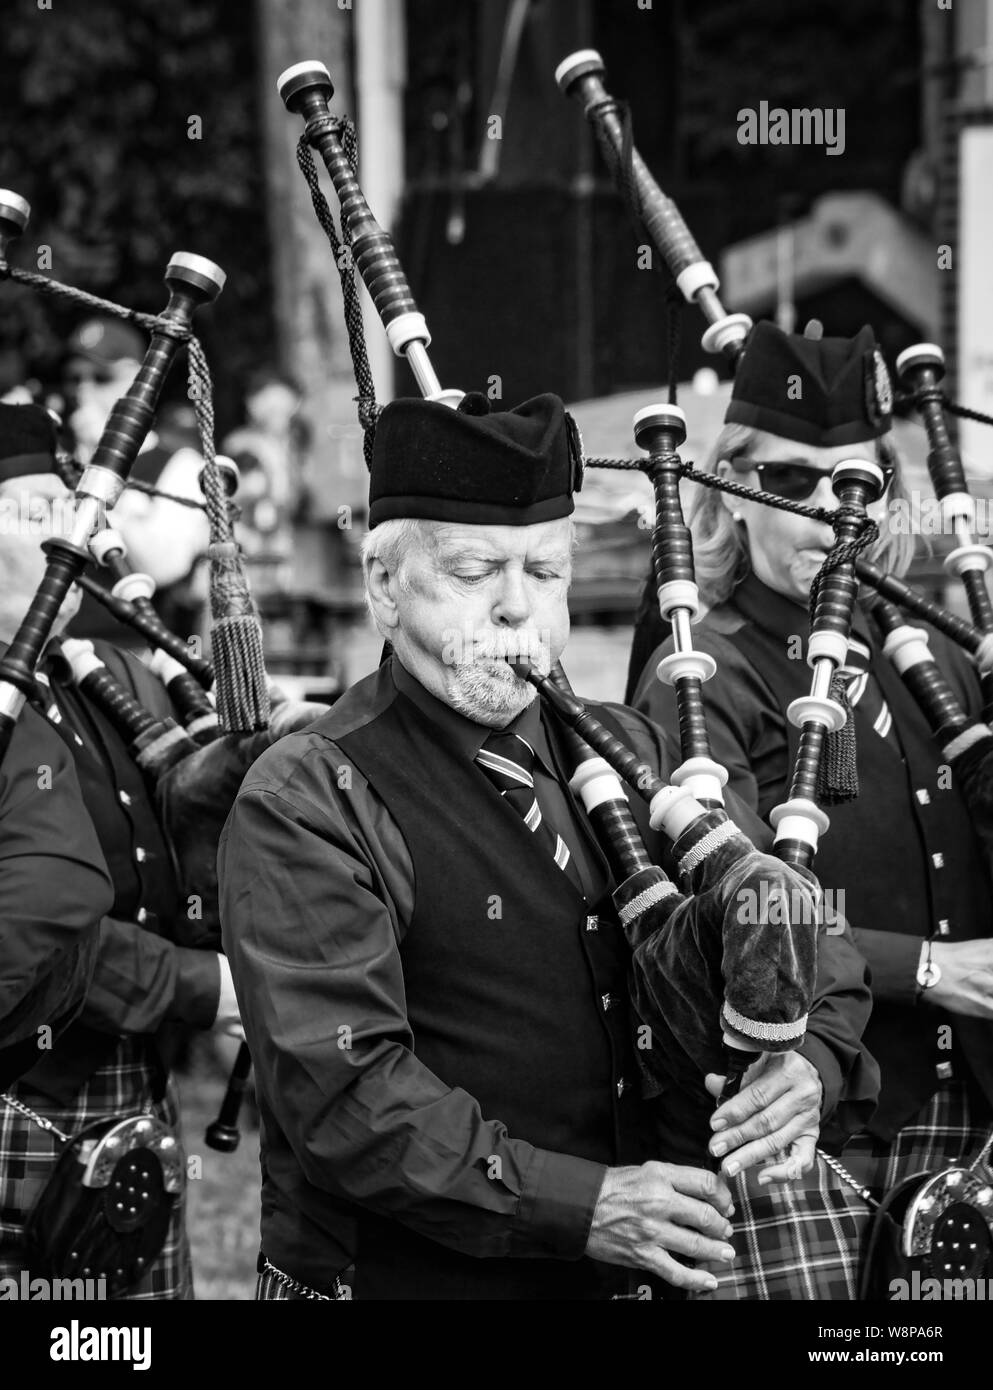 Fergus, Ontario, Canada - 08 11 2018: Piper of the Hamilton Police Pipes and Drums band paricipating in the Pipe Band contest held by Pipers and Pipe Stock Photo